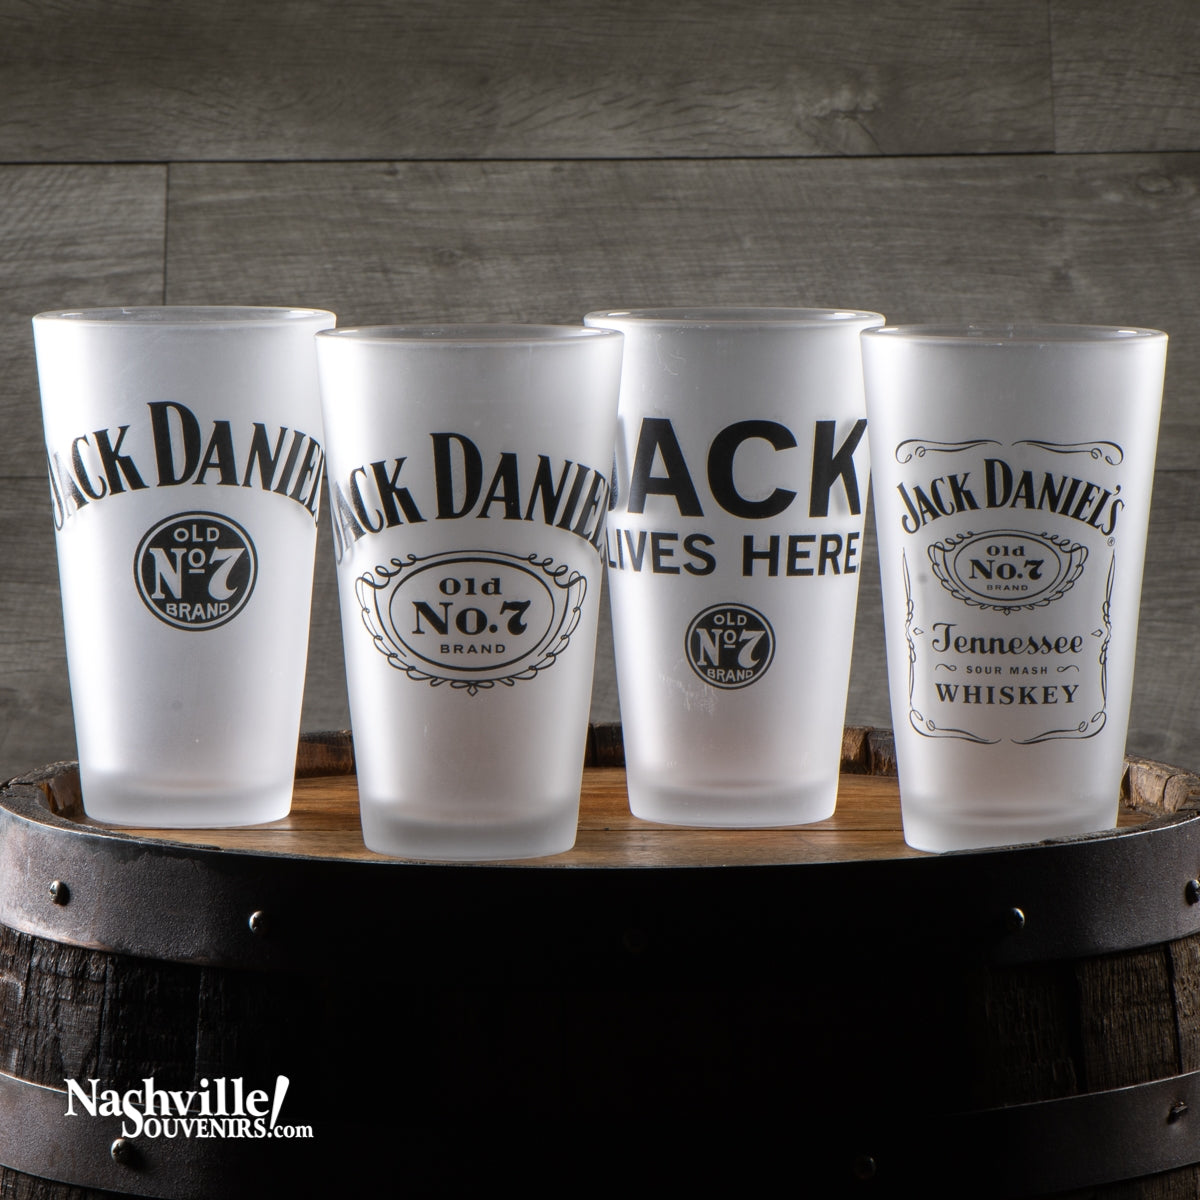 This JD glass set features four frosted pint glasses (16 ounce/ 480 ml capacity). Each glass sports a different Jack Daniel's logo or branding including the Swing and Cartouche, Jack Lives Here, Bottle Label Logo and the Swing and Bug logo.